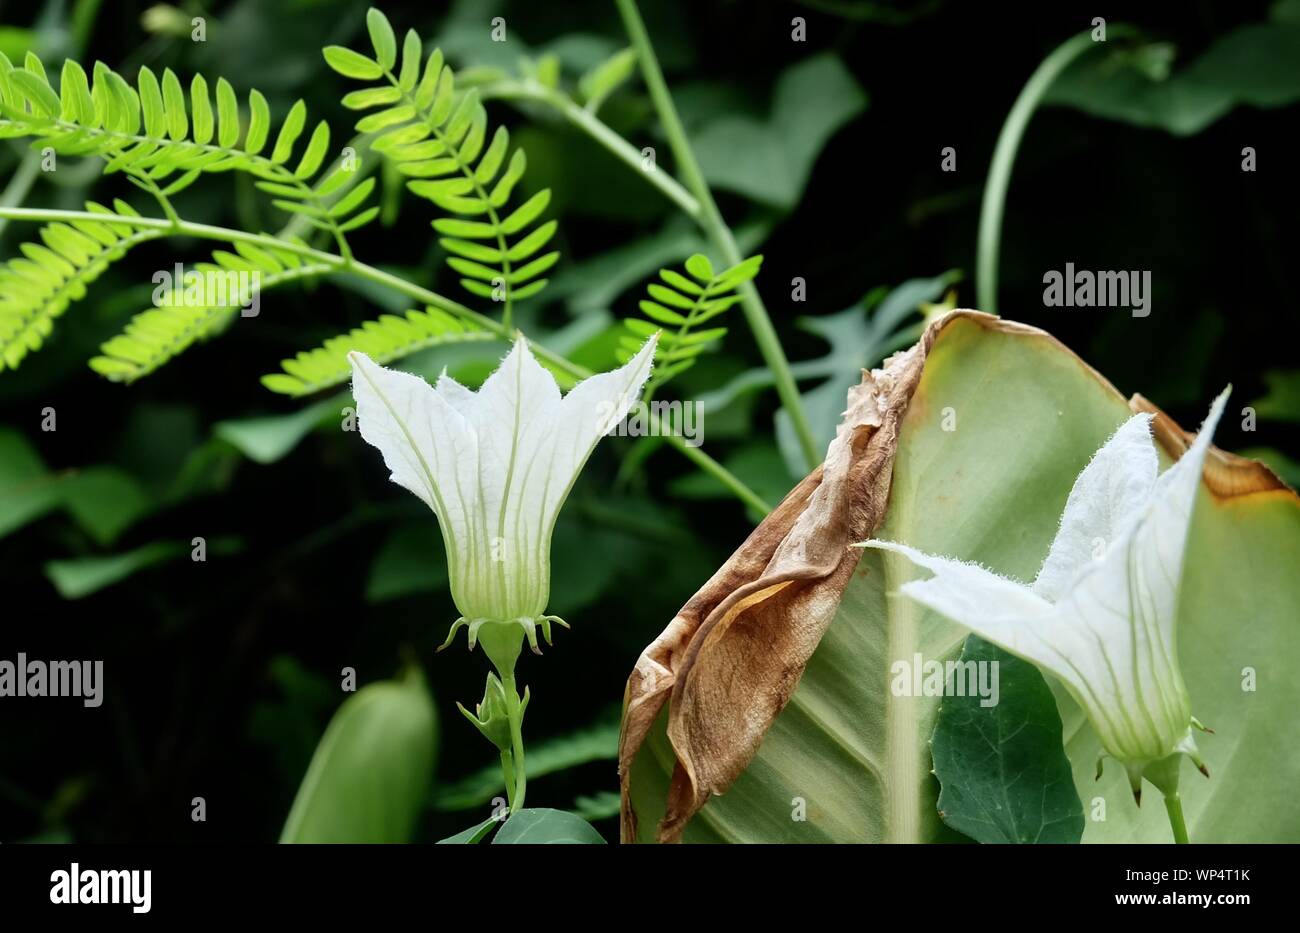 Vegetable and Herb, Fresh WhiteCoccinia Grandis or Ivy Gourd Blossom Blooming in Kitchen Garden. Stock Photo